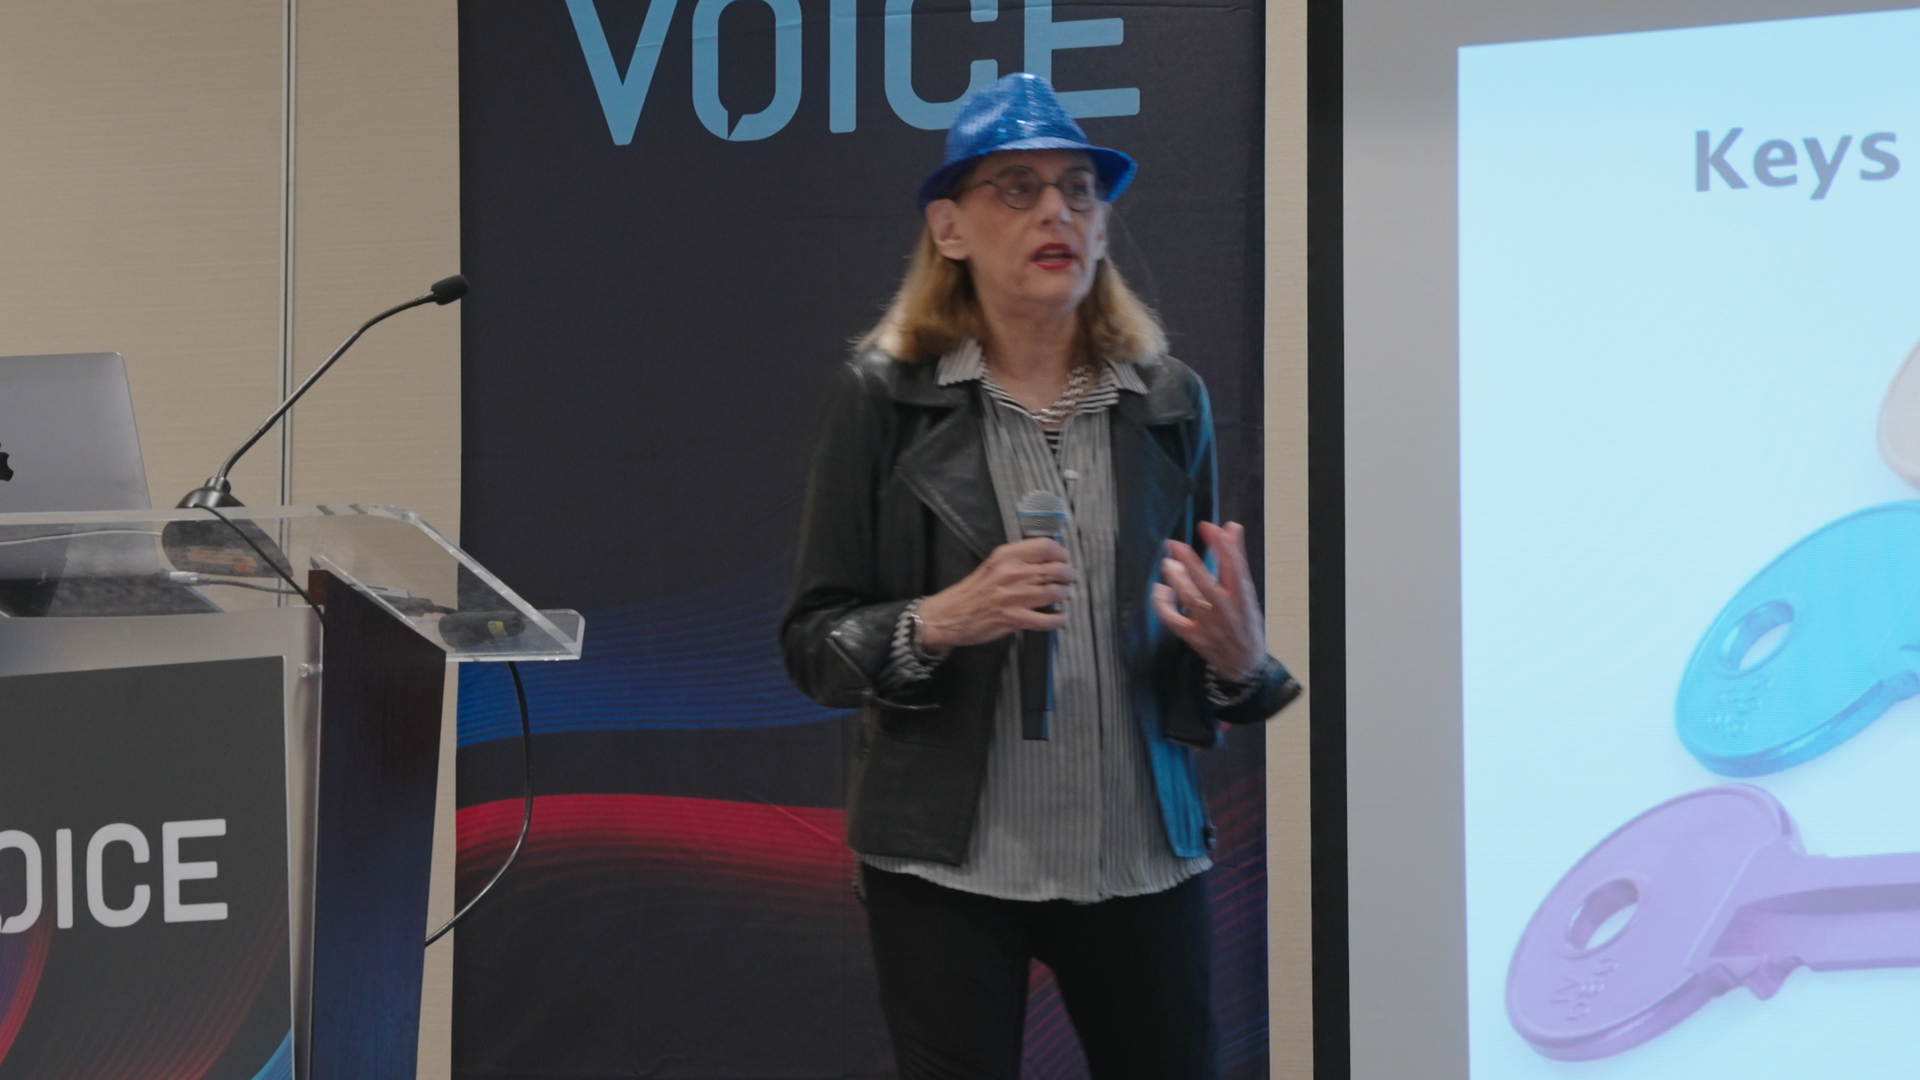 VOICE22 | Voice Marketing Made Easy- How To Profitably Attract, Nurture And Grow Your Audience | Heidi Cohen